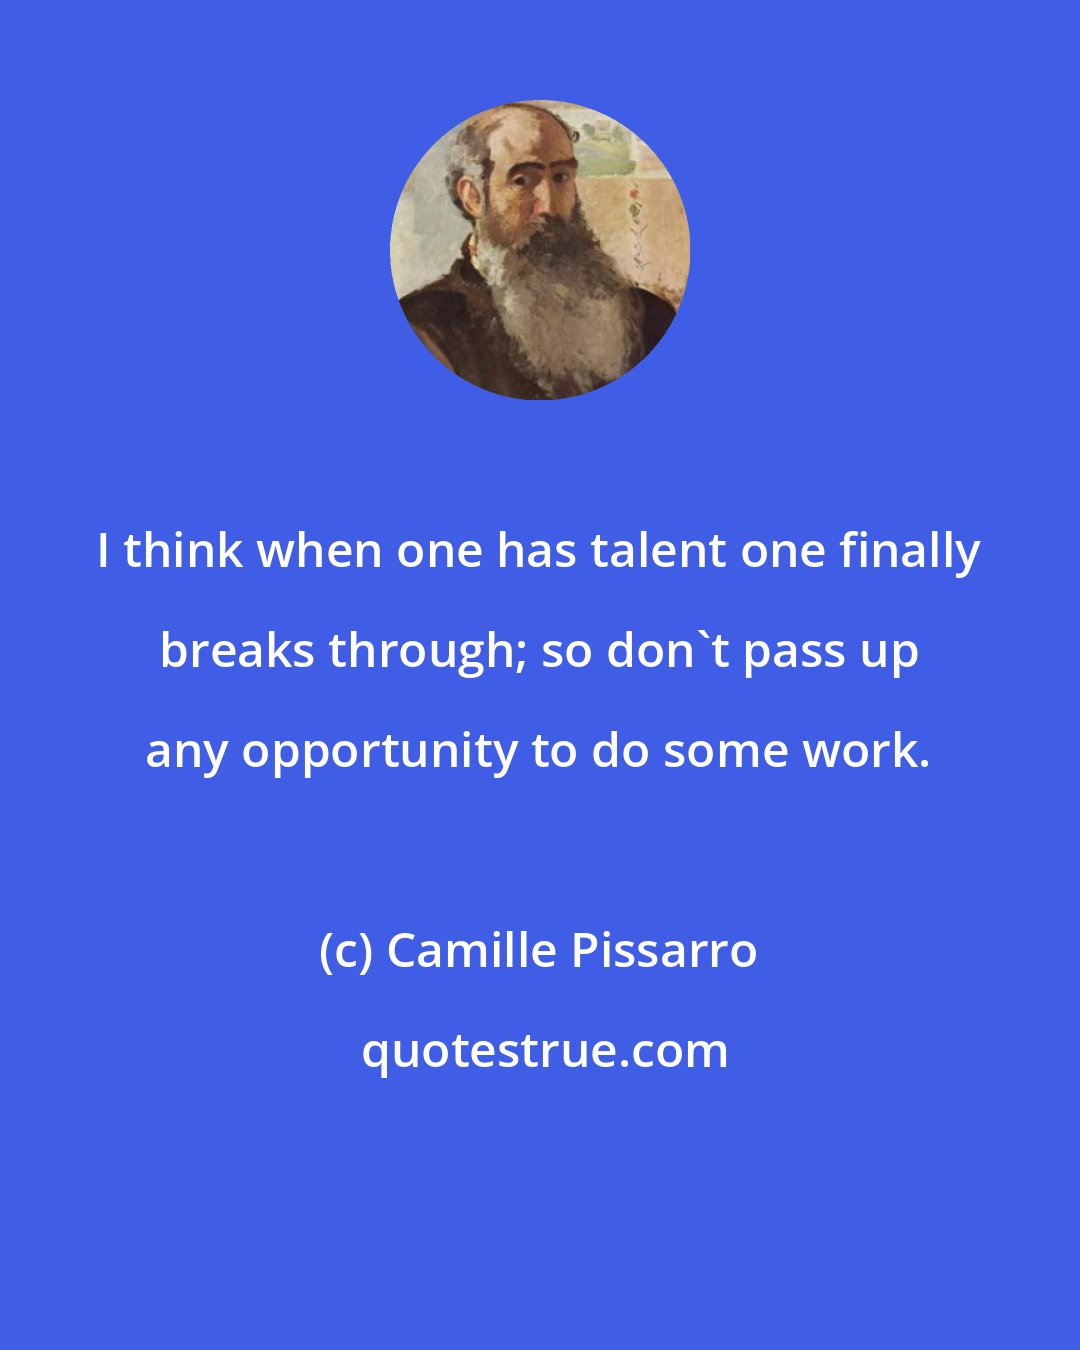 Camille Pissarro: I think when one has talent one finally breaks through; so don't pass up any opportunity to do some work.